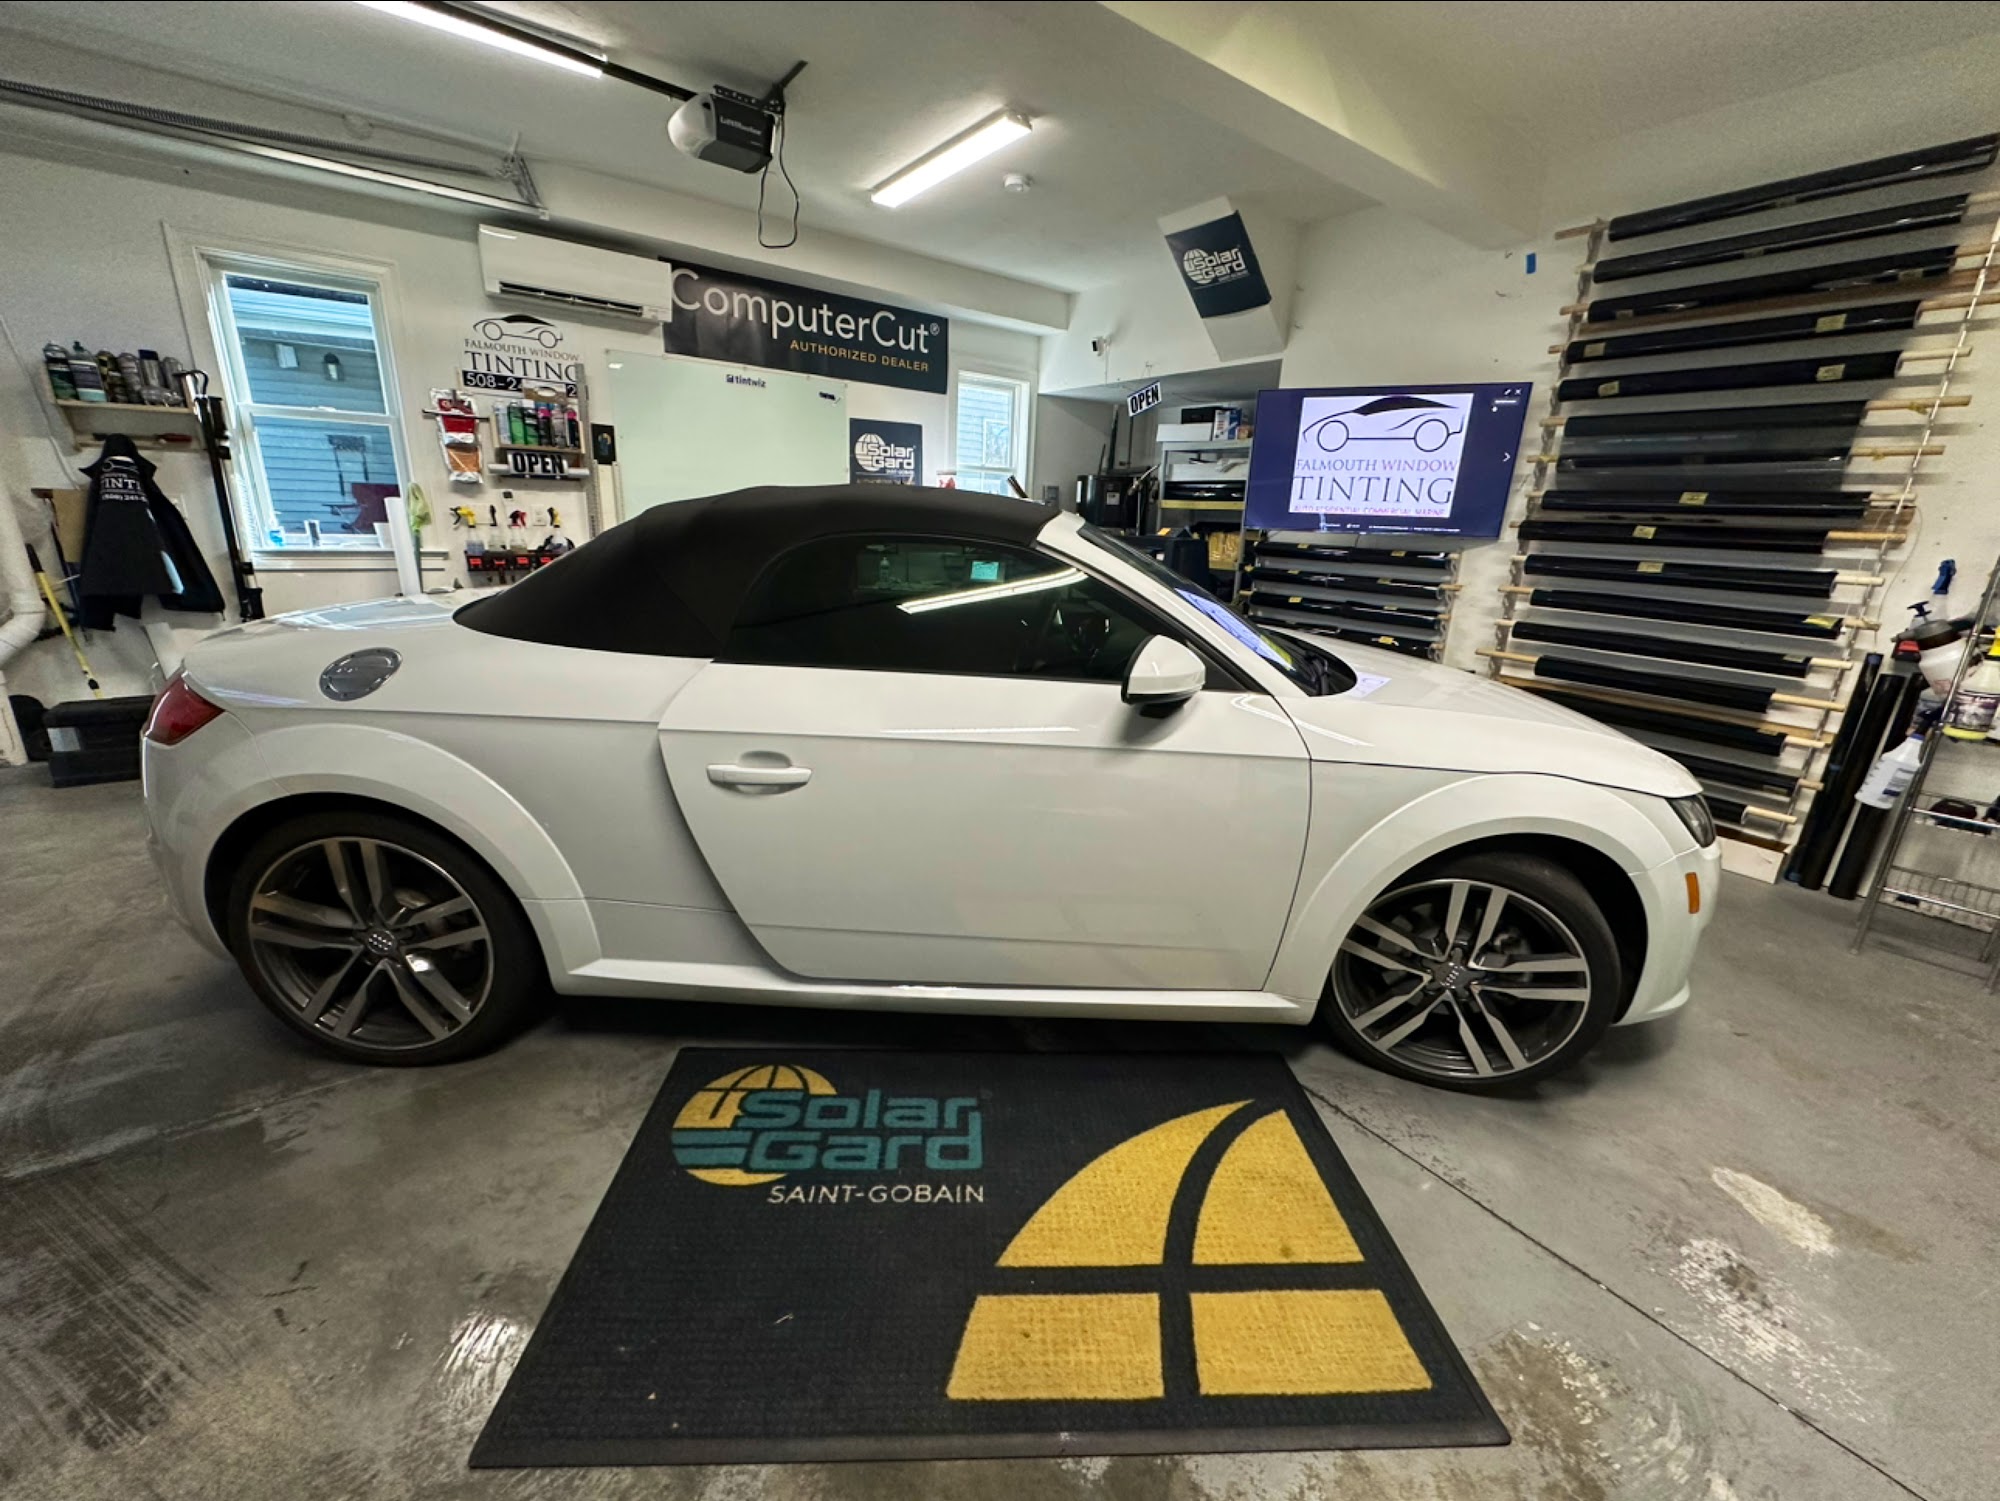 Falmouth Window Tinting Residential Commercial Auto